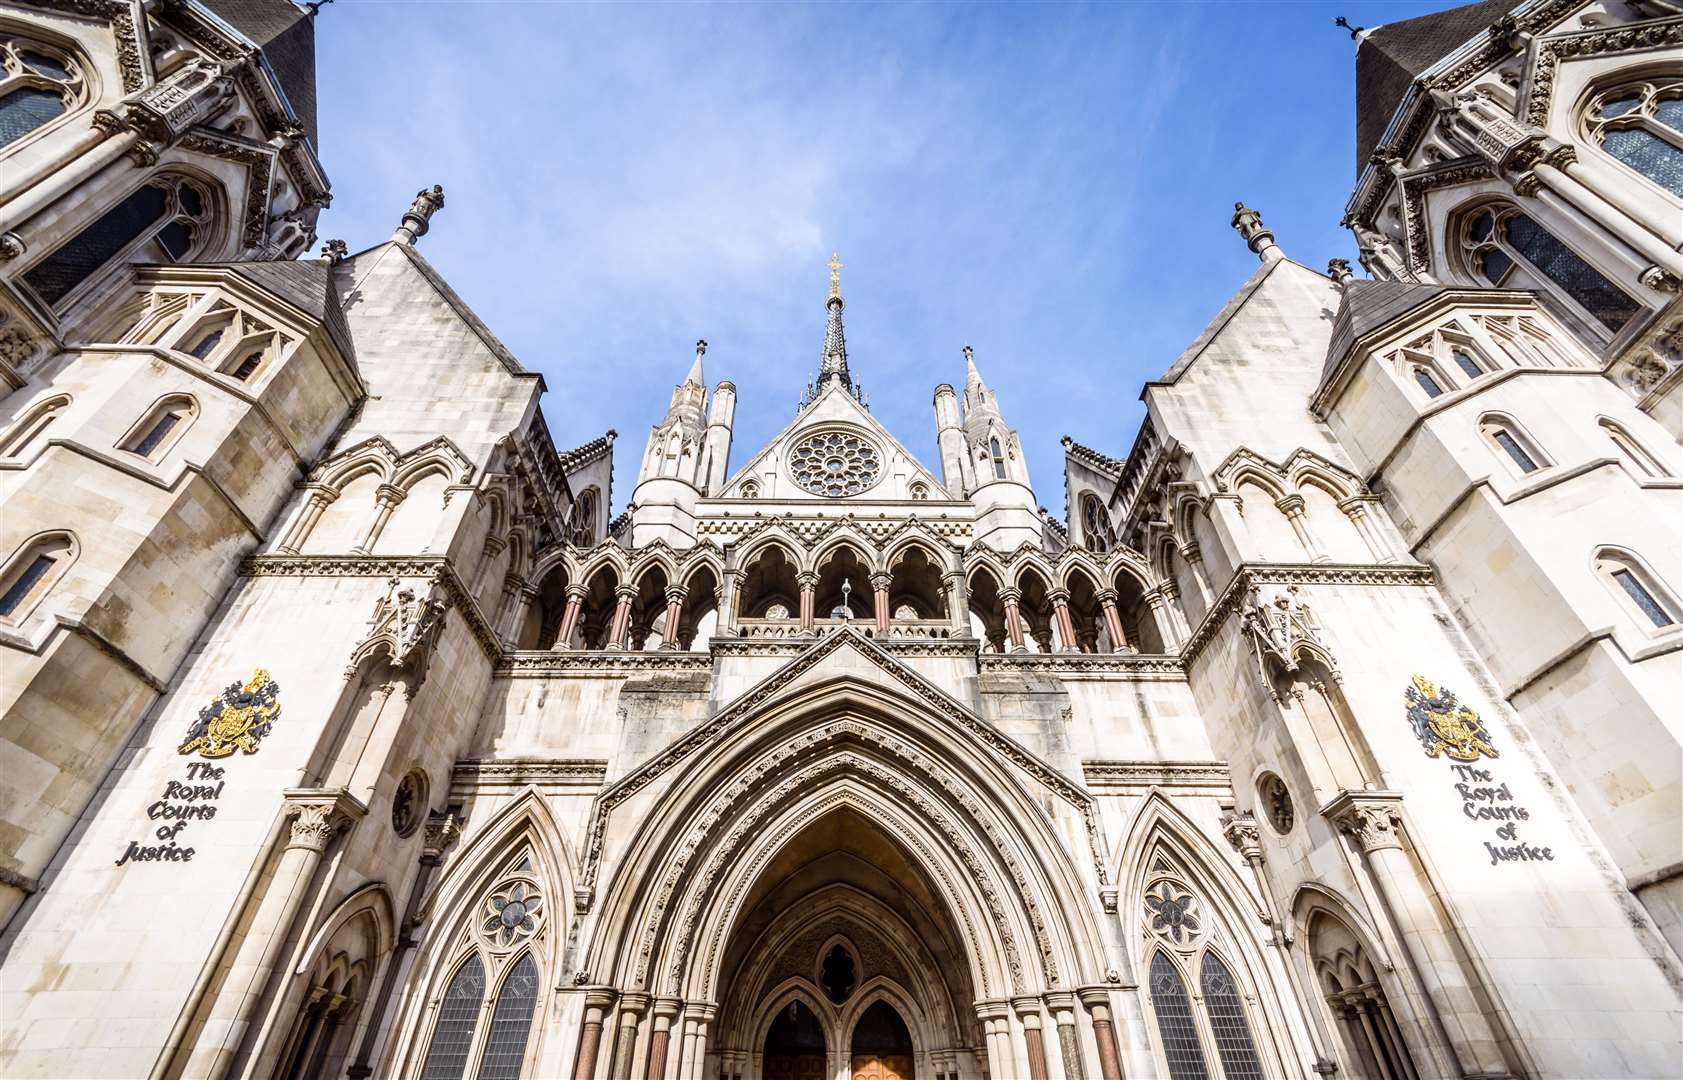 The Court of Appeal gave Jenny Dawes’ latest appeal the green light this week